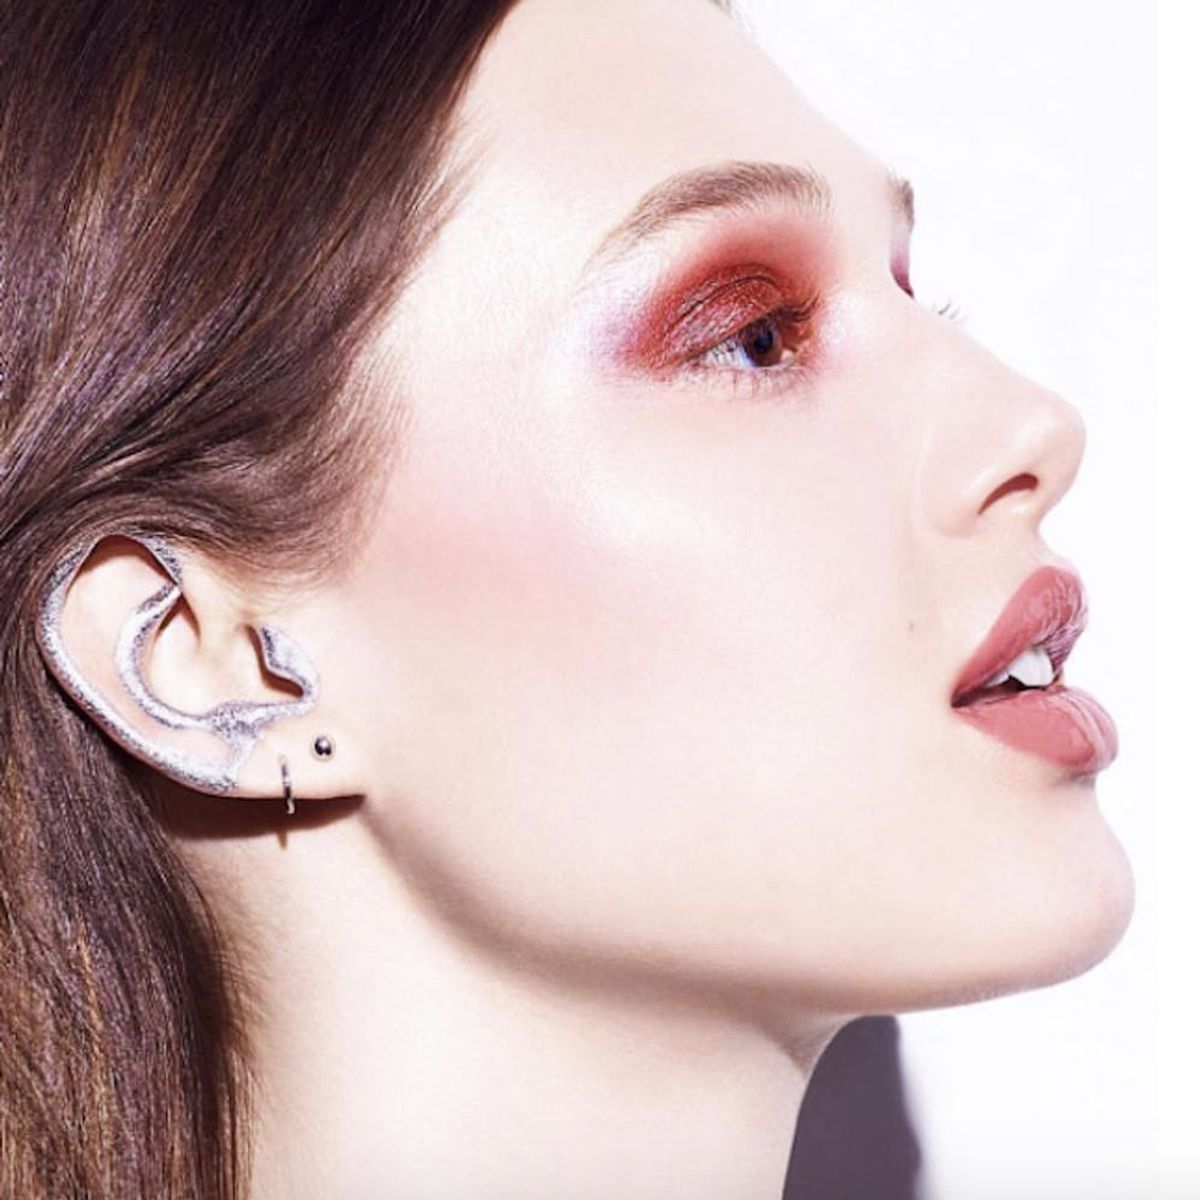 Ear Art Makeup: The Trend You Need to Know RN